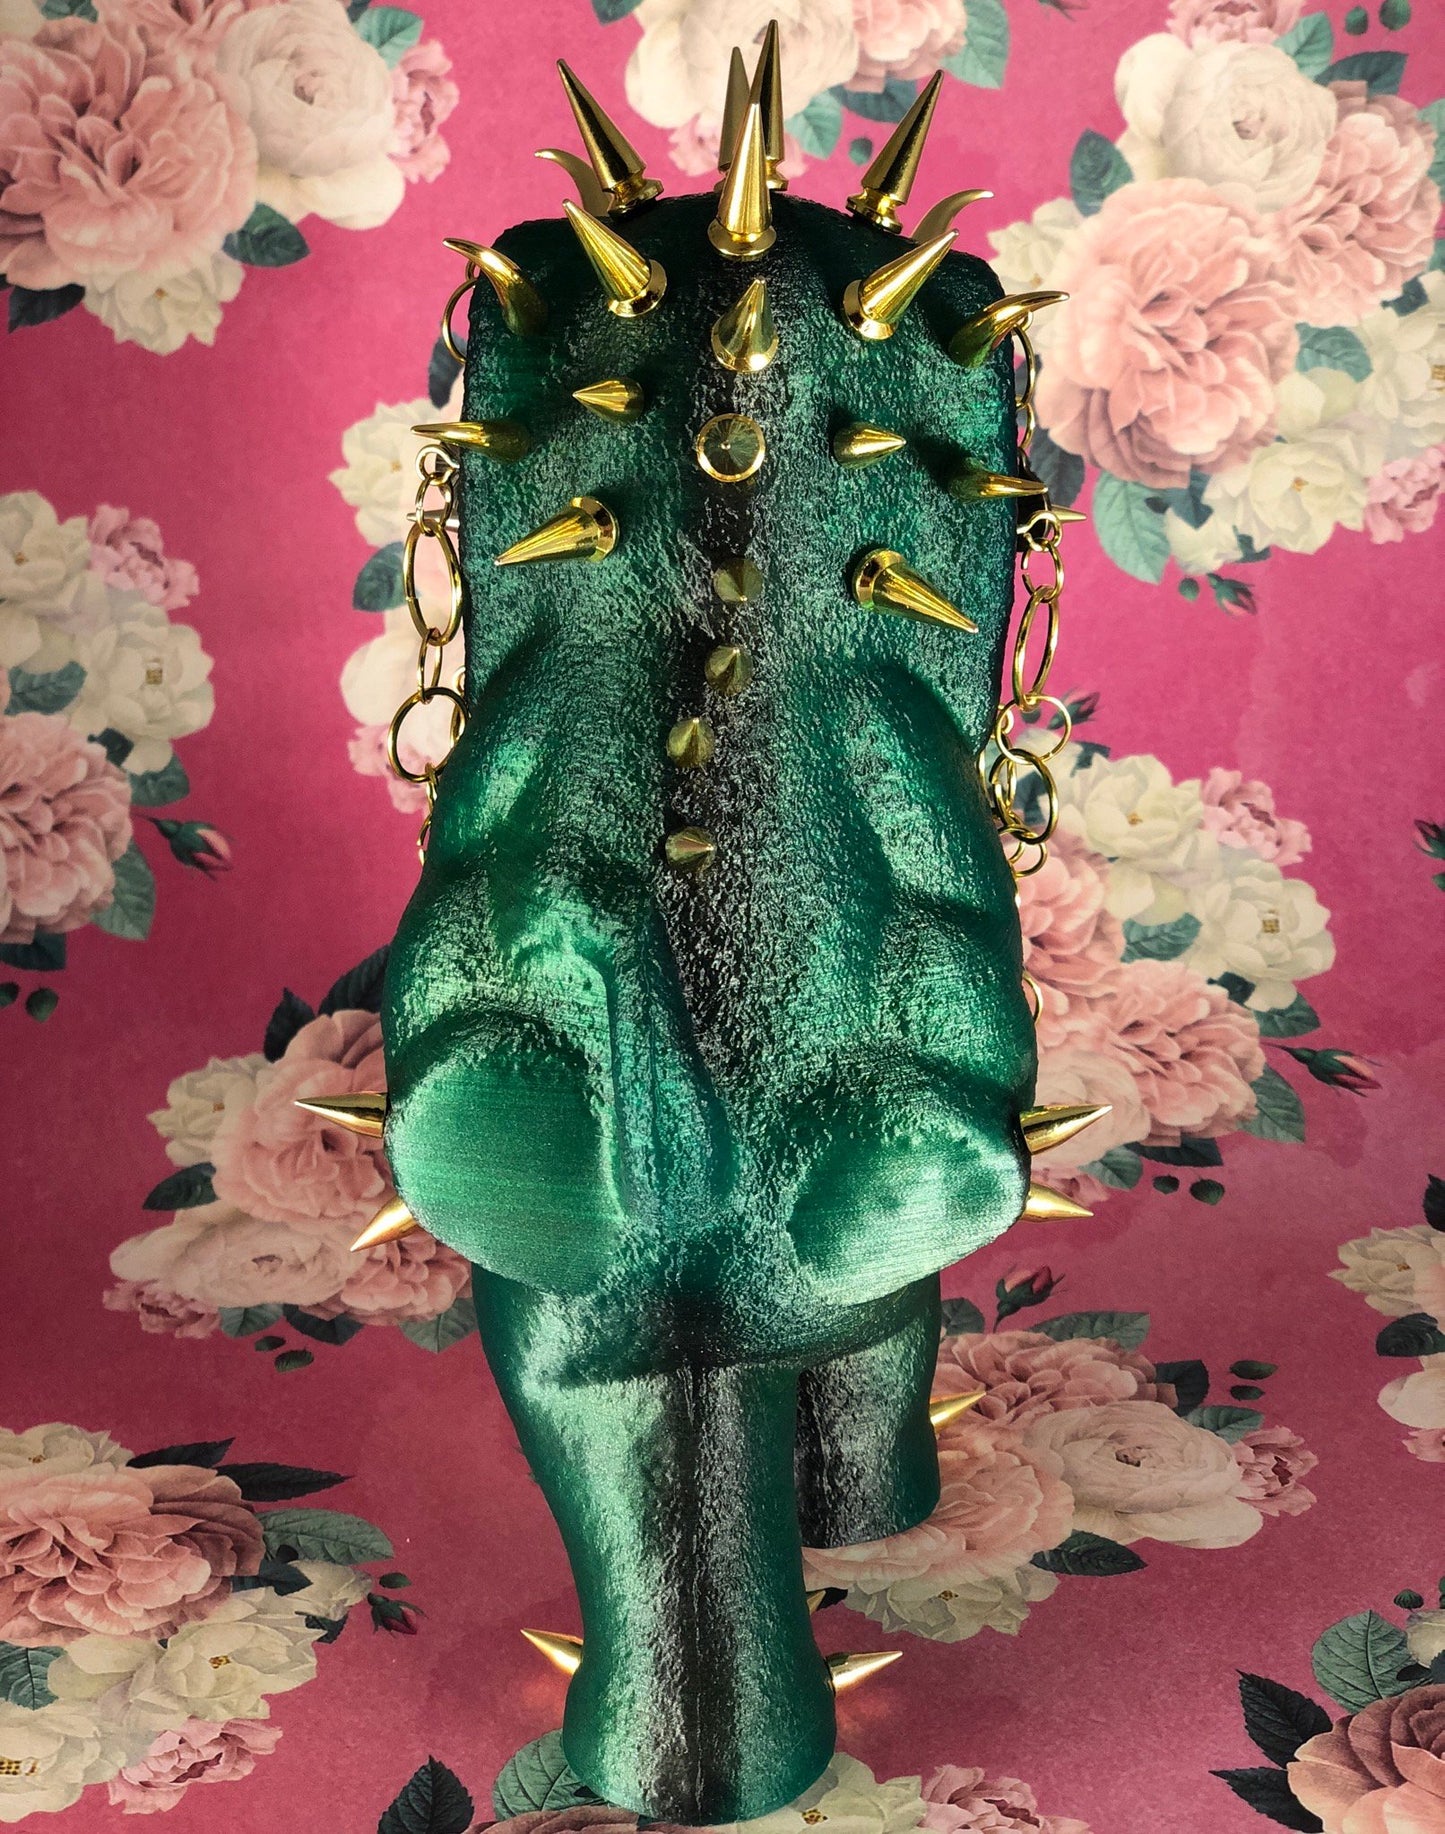 Waking Elephant: Translucent Green with Black. Gold Spikes and Such